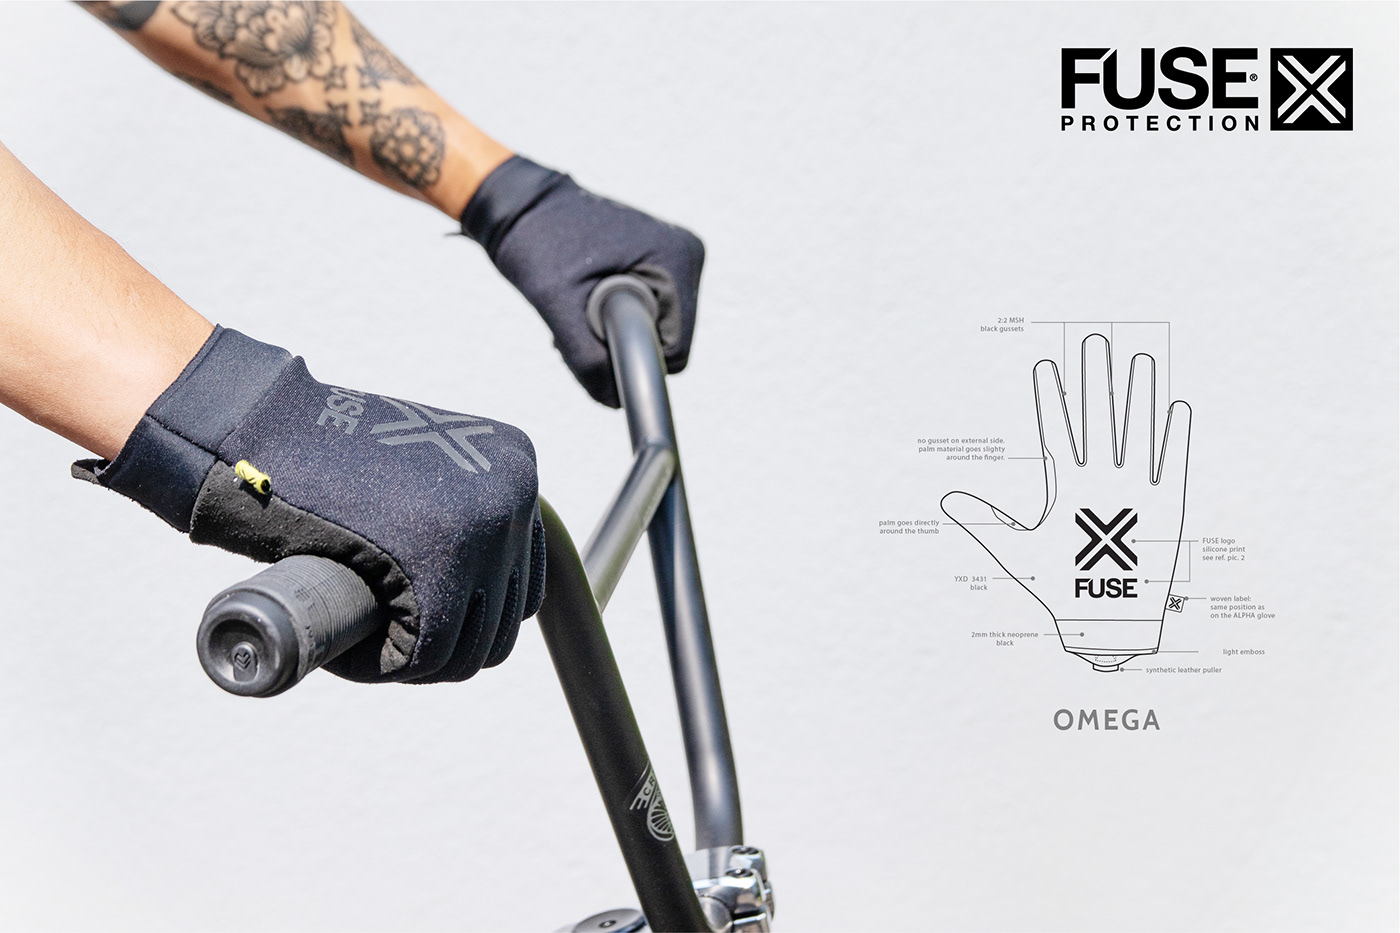 close up - OMEGA gloves - FUSE PROTECTION